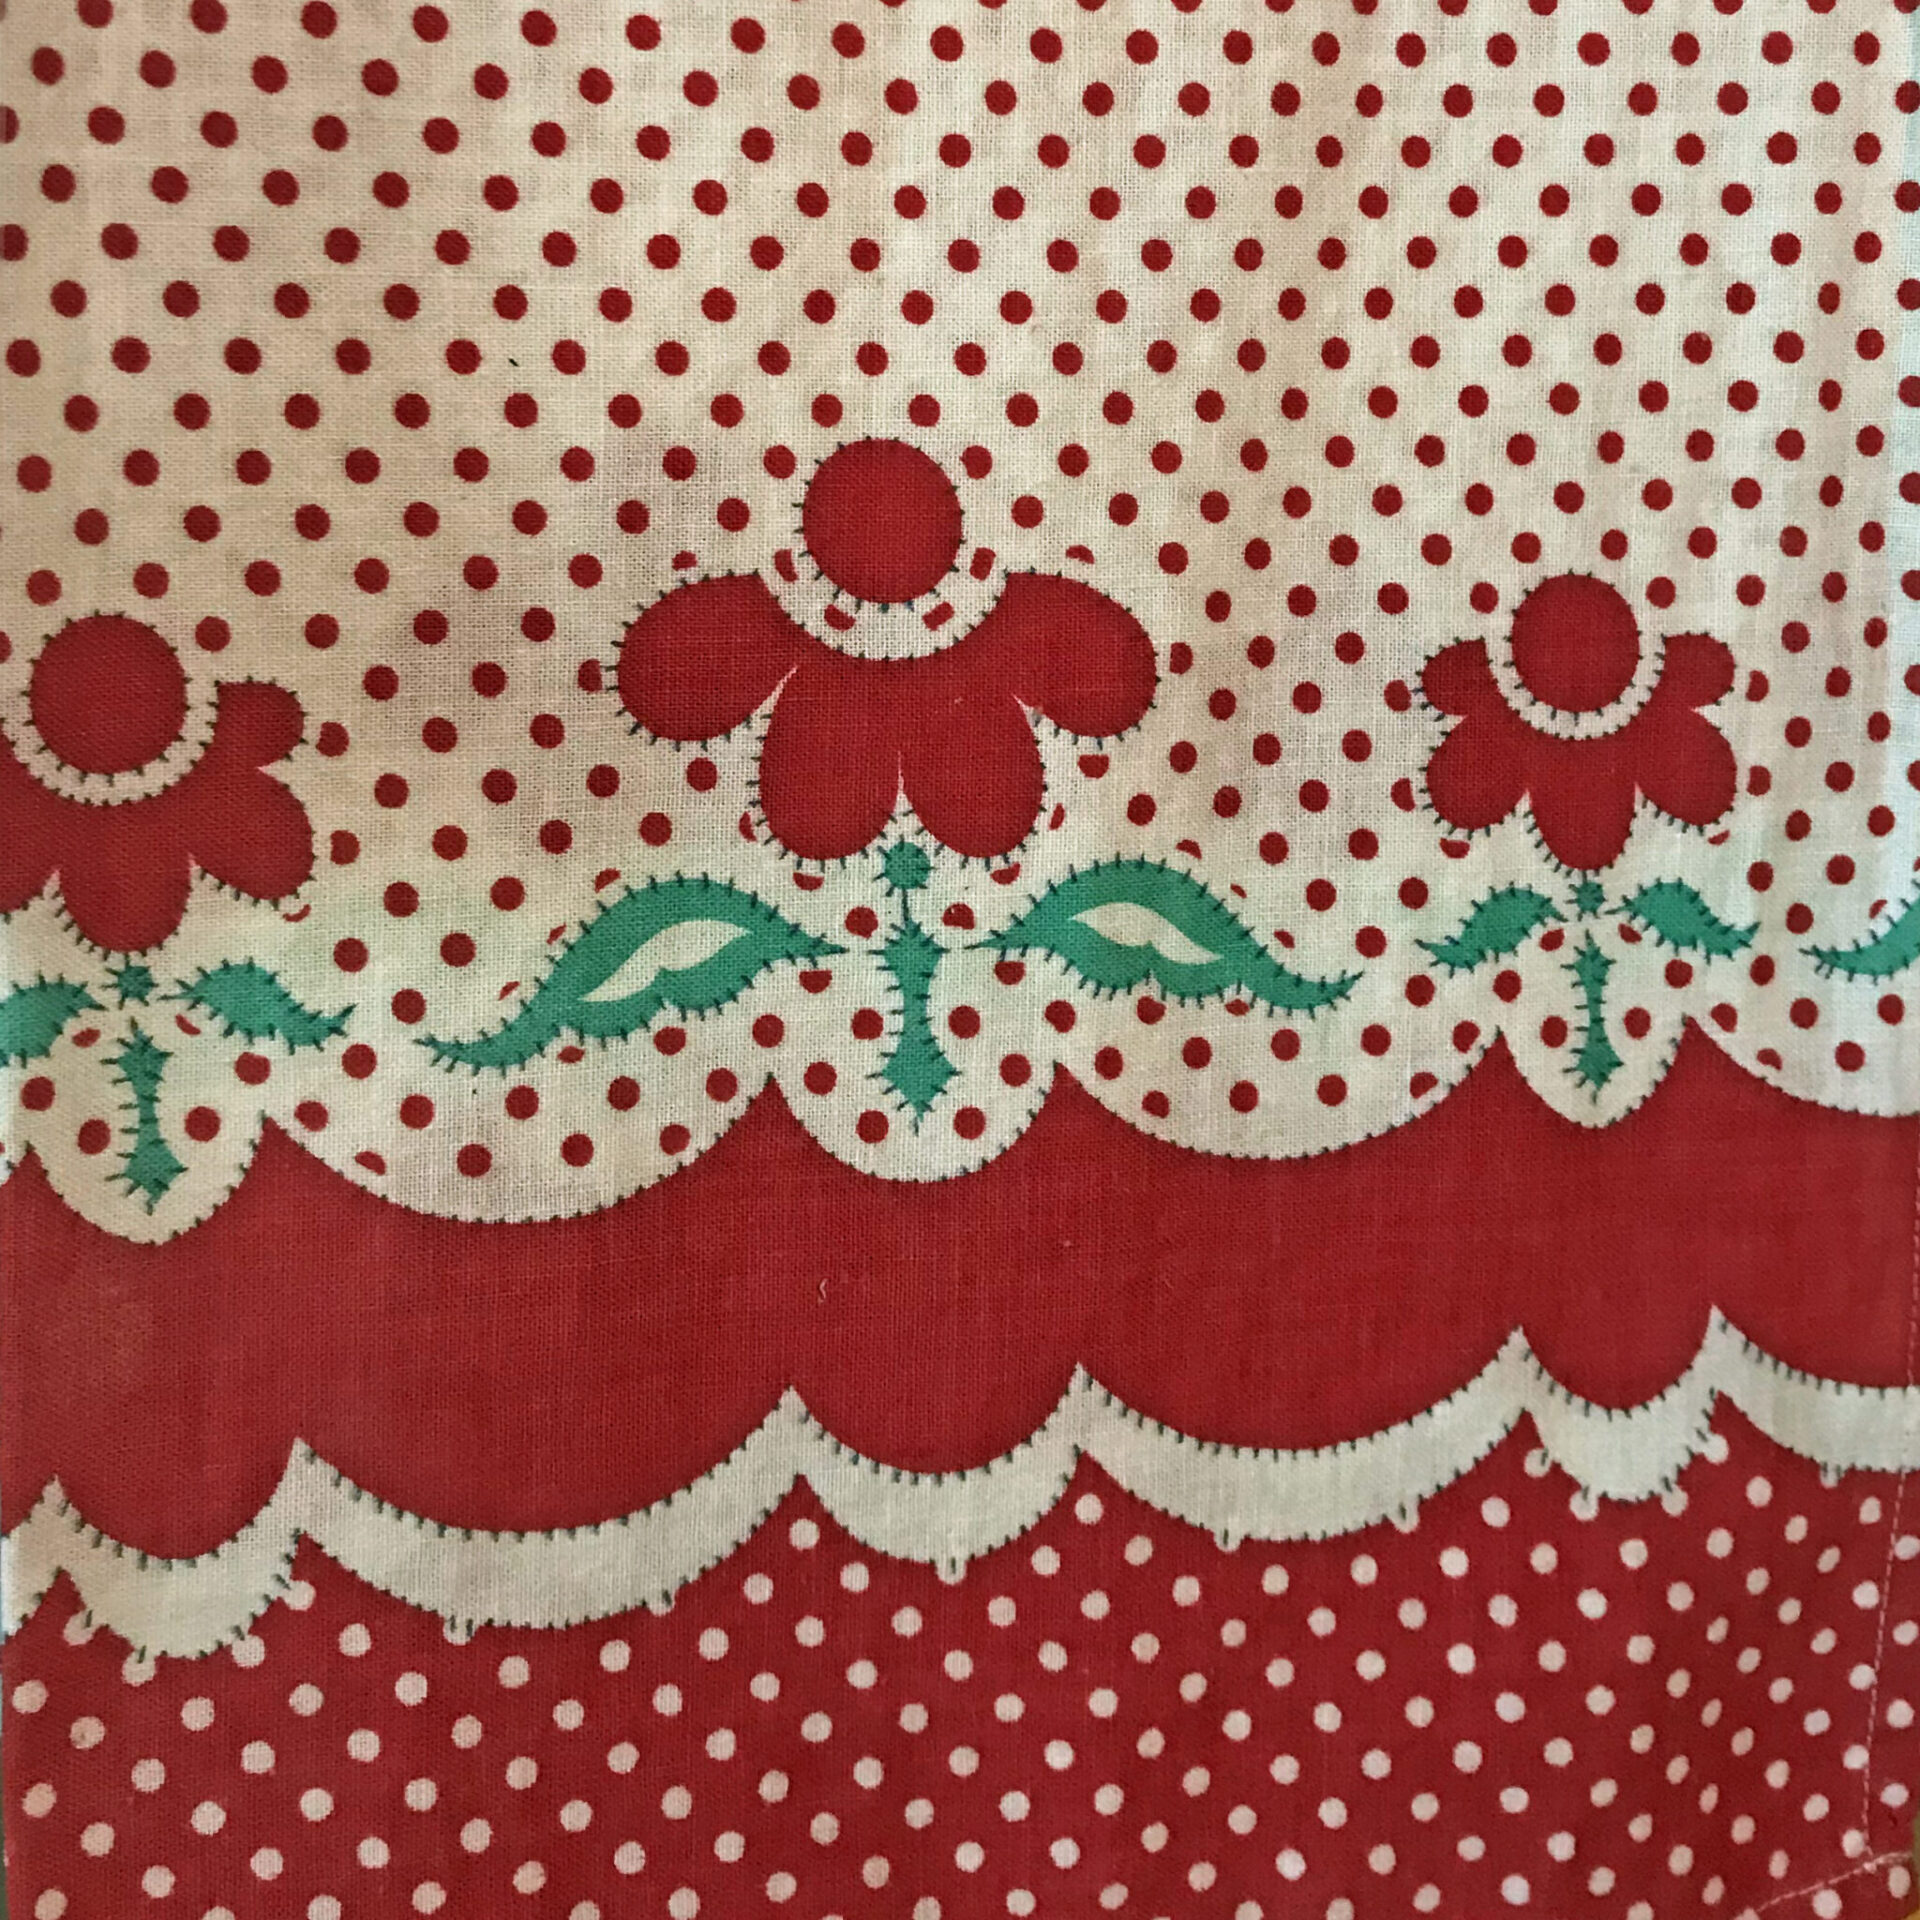 A flour sack with a bright red, white, and green print.  It has polka dots and red flowers.